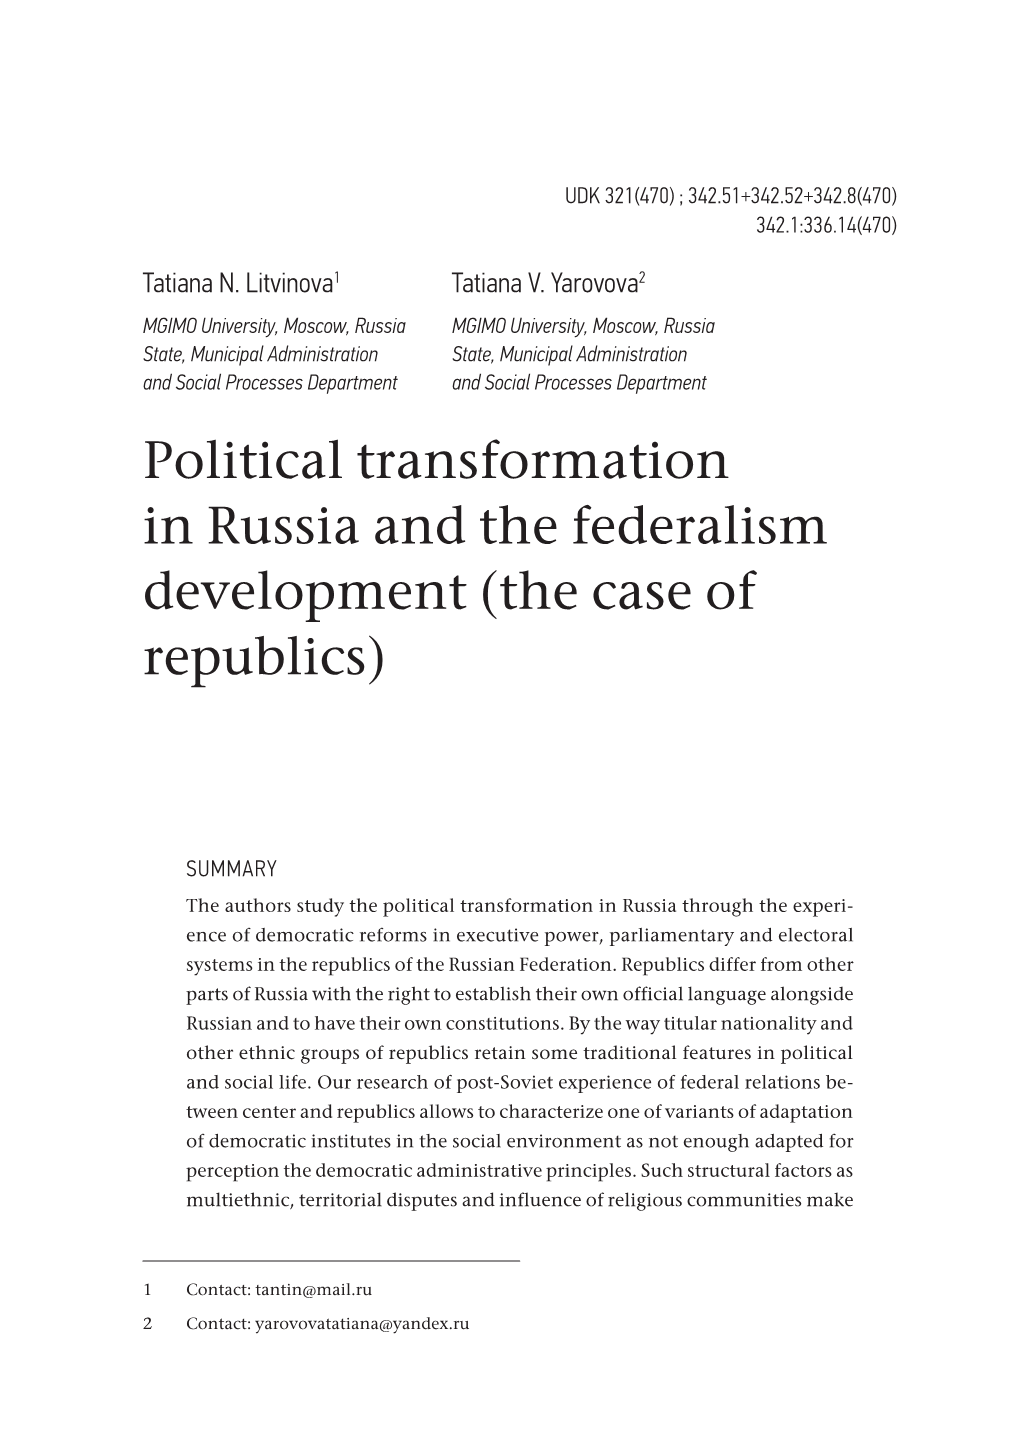 Political Transformation in Russia and the Federalism Development (The Case of Republics)